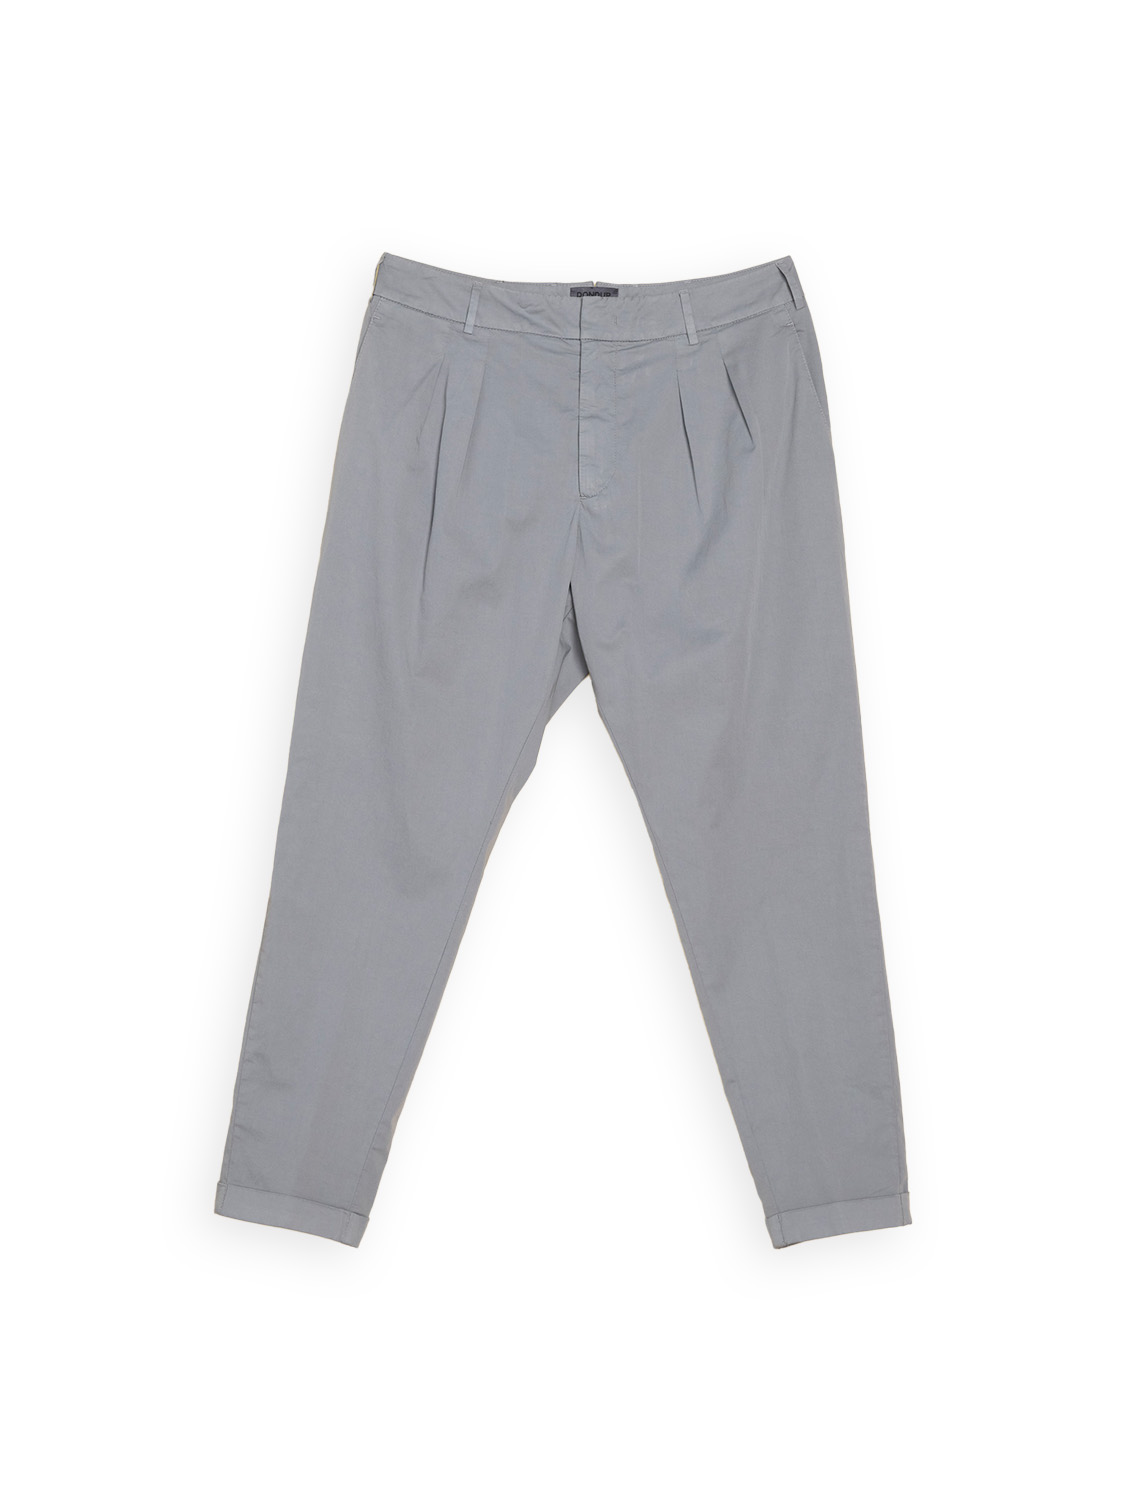 Chino style trousers in grey 